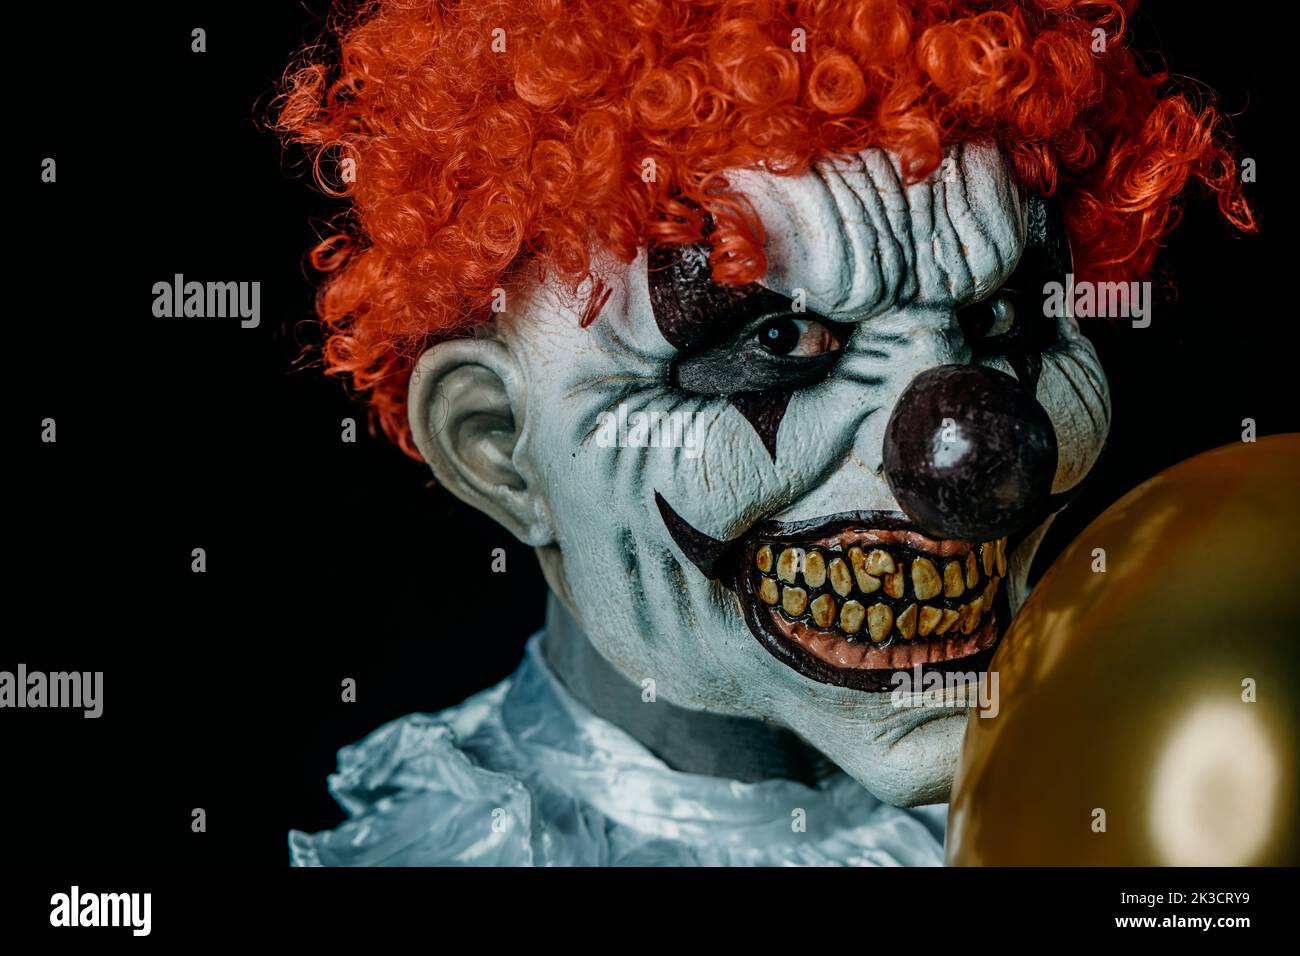 closeup of a creepy evil clown with red hair, staring at the observer, holding a golden balloon in front of him, against a black background Stock Photo